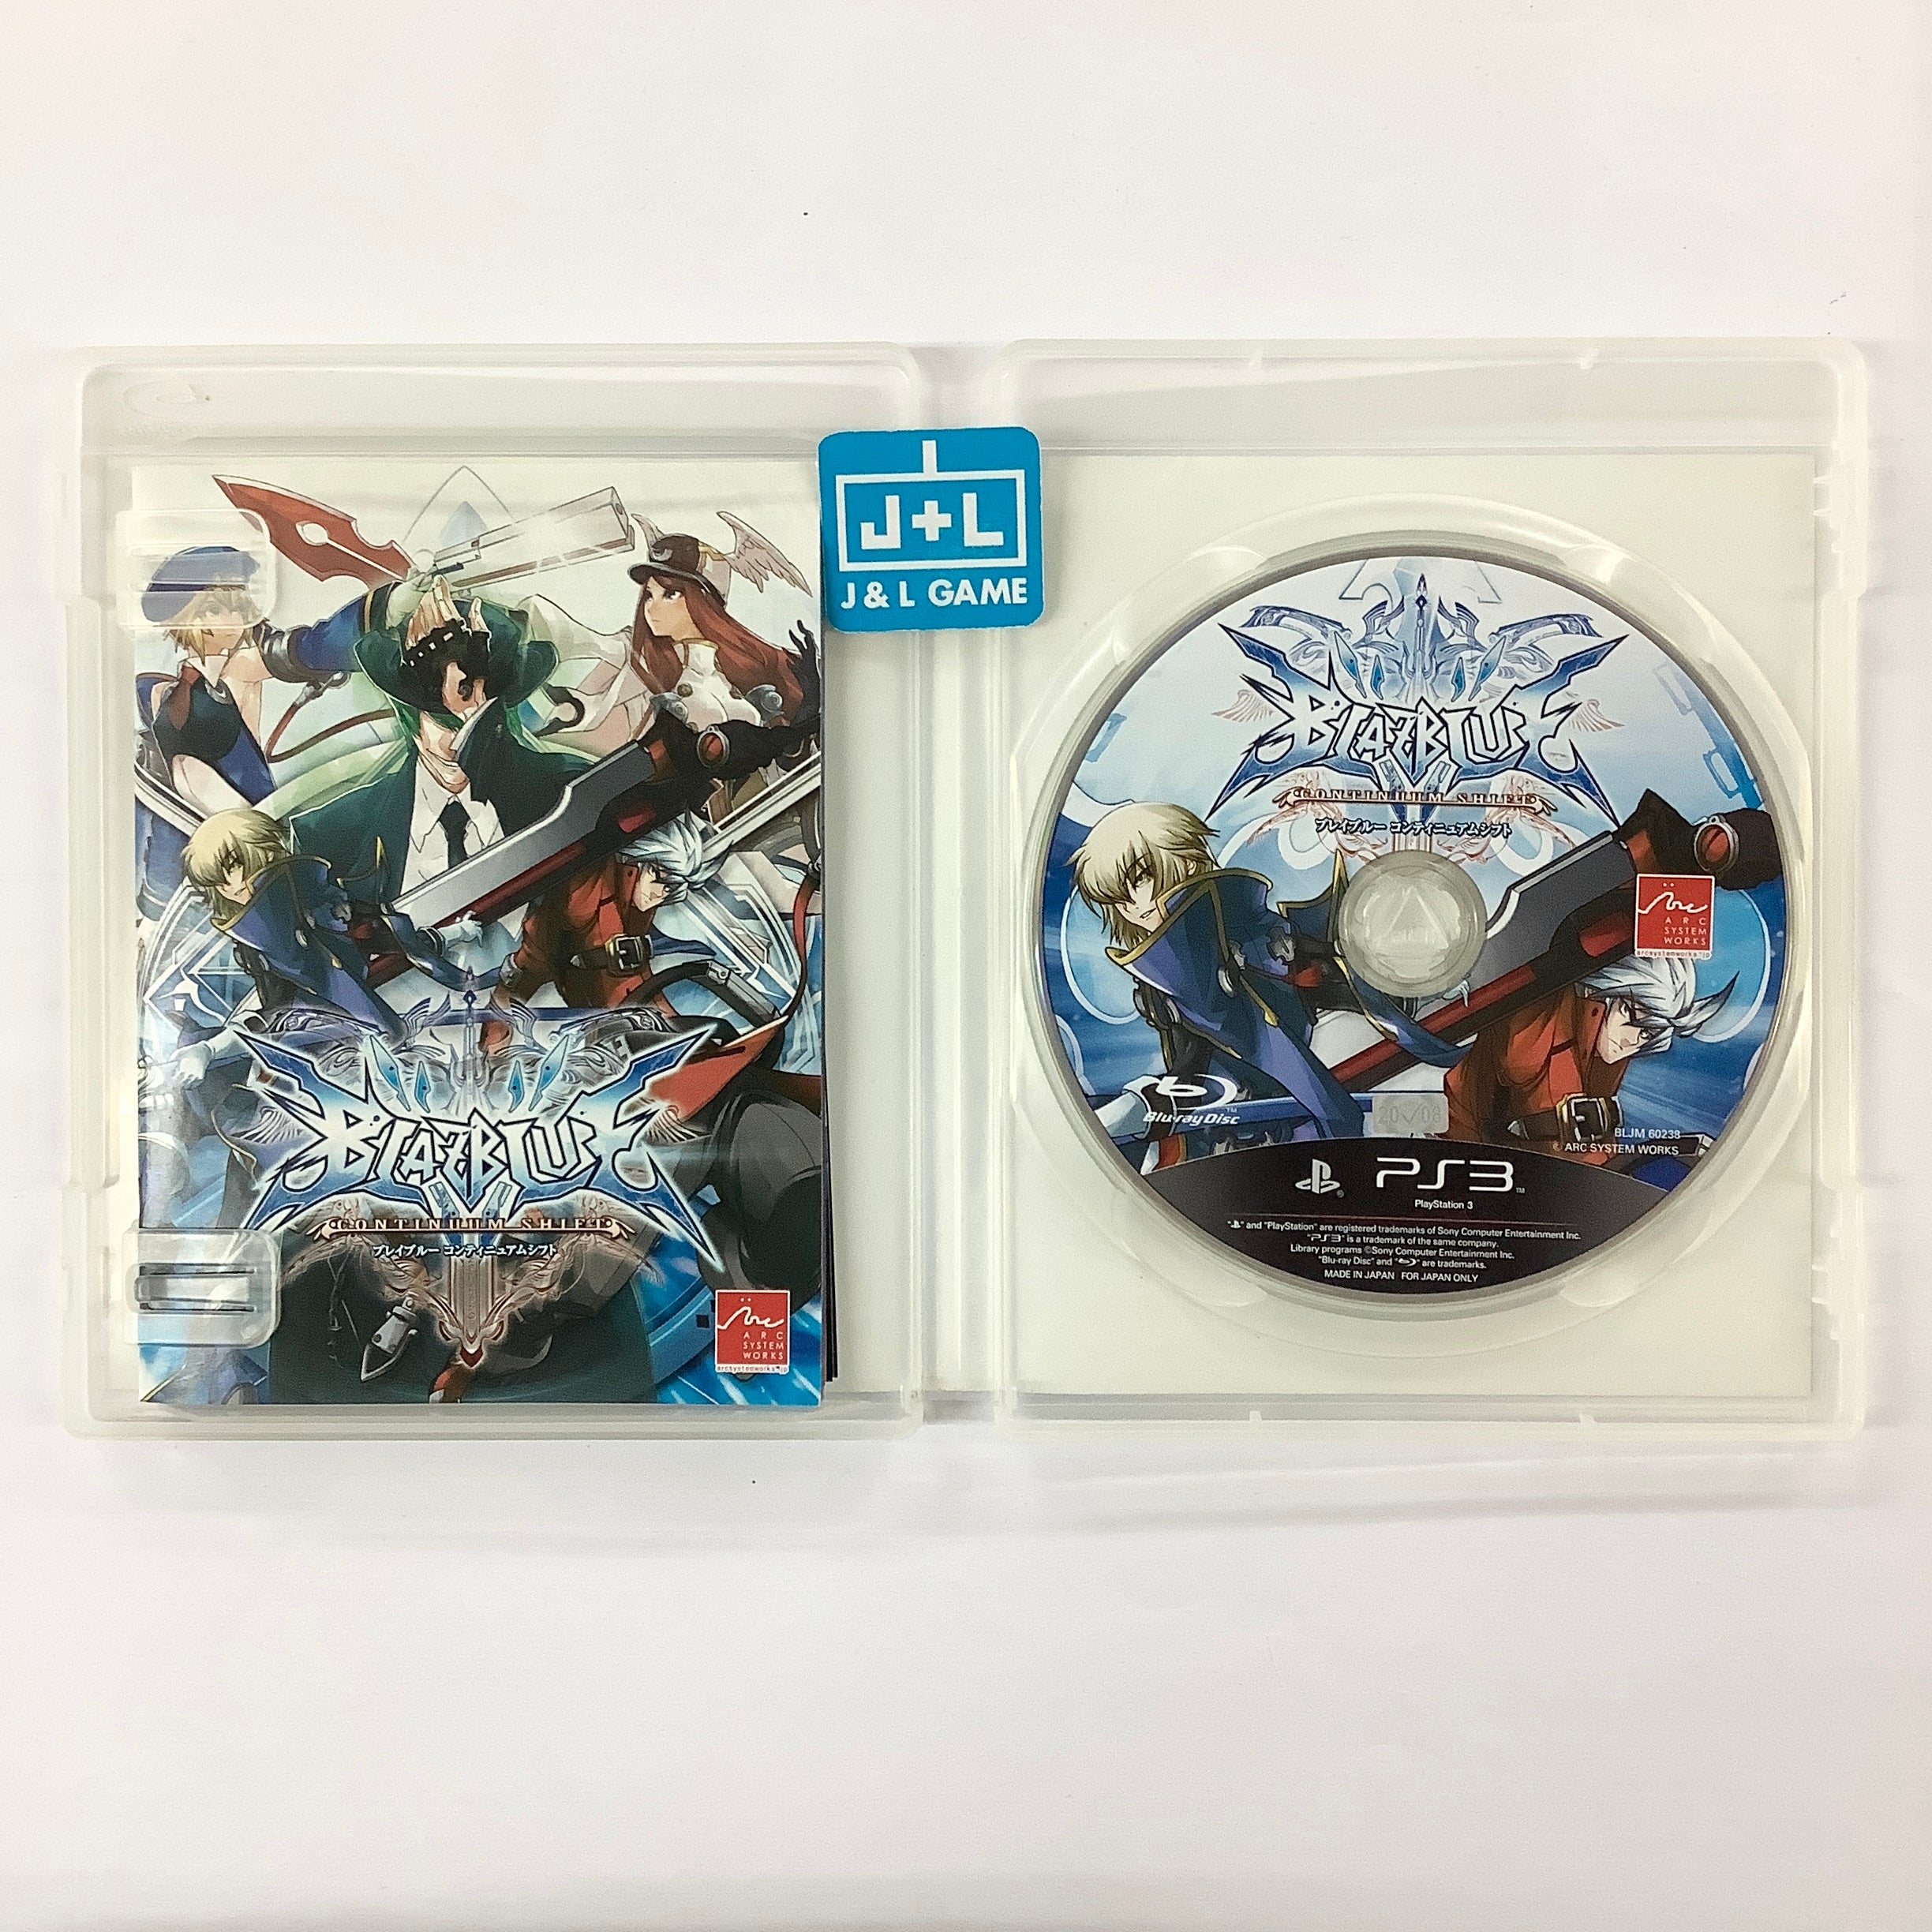 BlazBlue: Continuum Shift - (PS3) PlayStation 3 [Pre-Owned] (Japanese Import) Video Games Arc System Works   